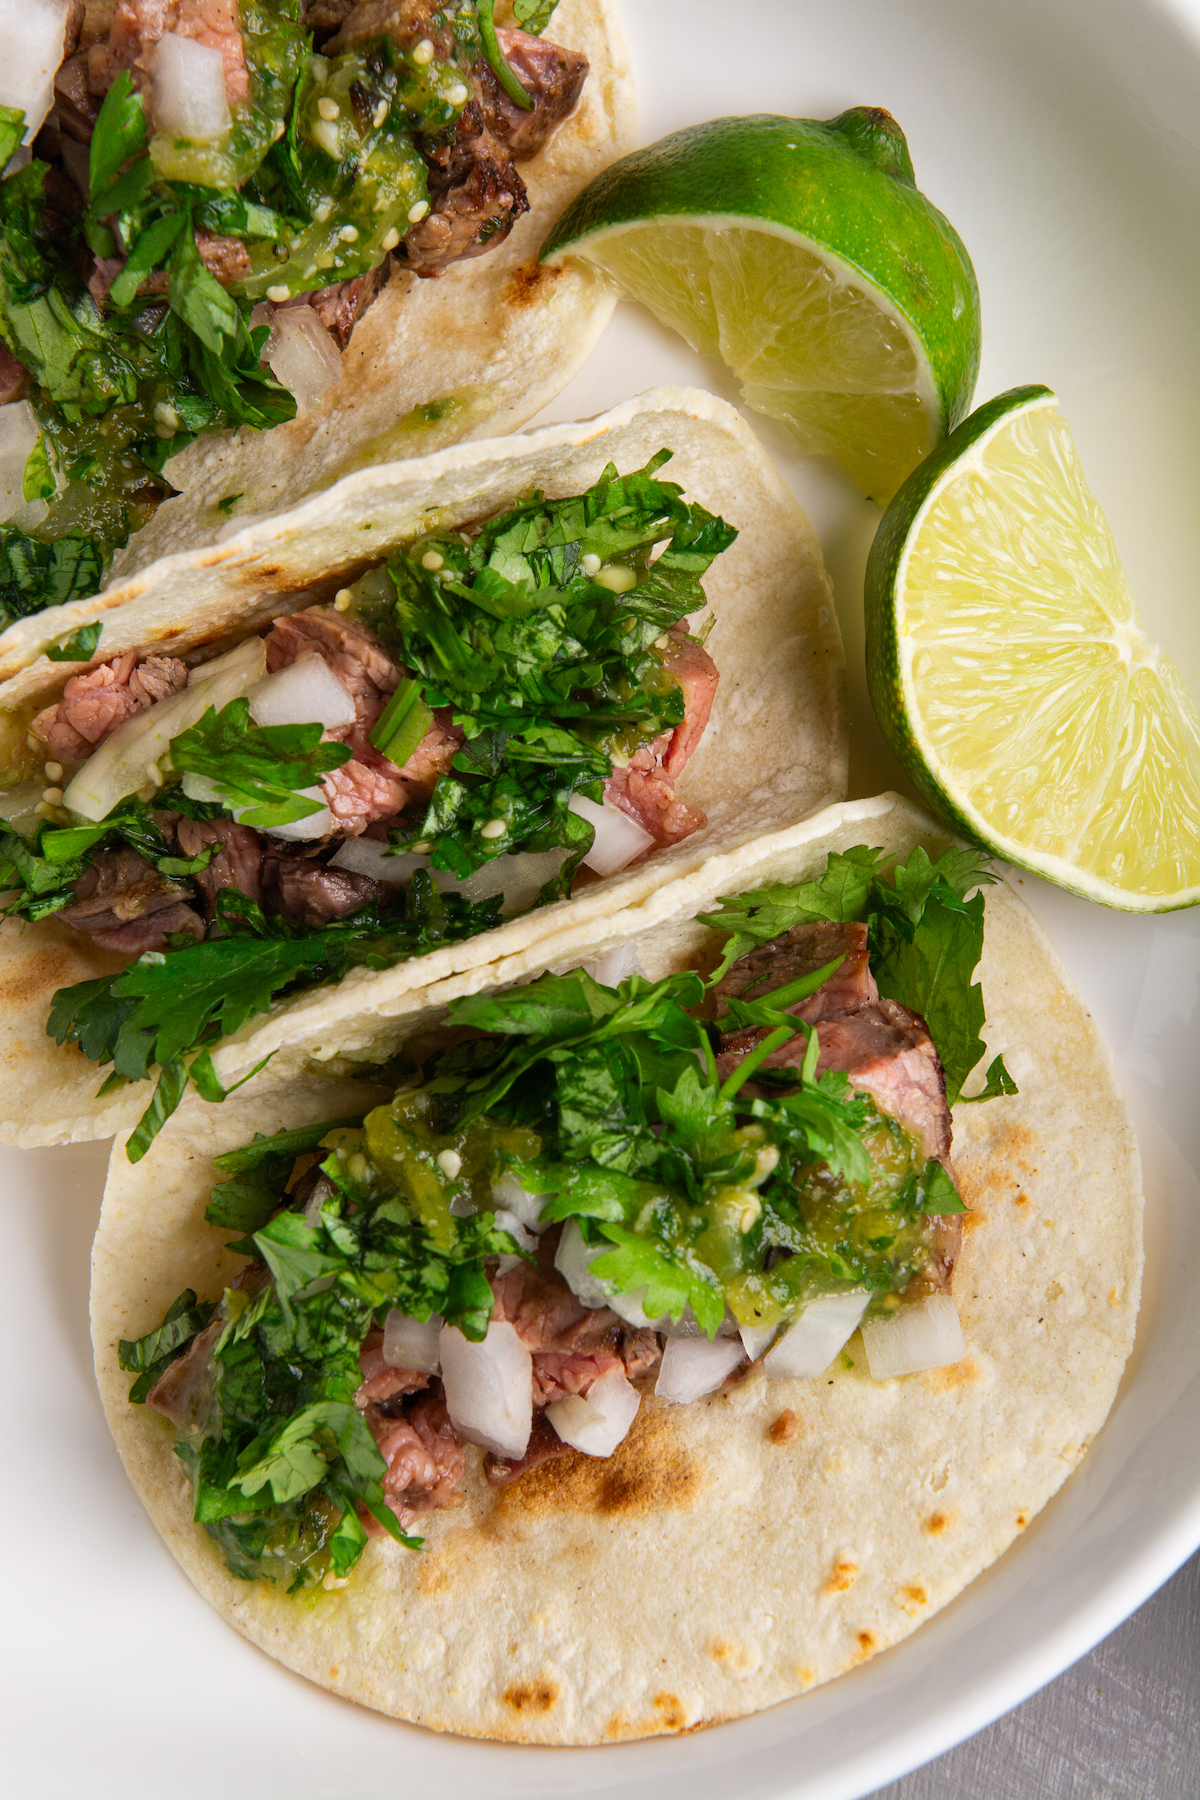 A plate with three carne asada tacos topped with cilantro, onion, and roasted tomatillo salsa verde, and two lime wedges placed on the right side of the plate.